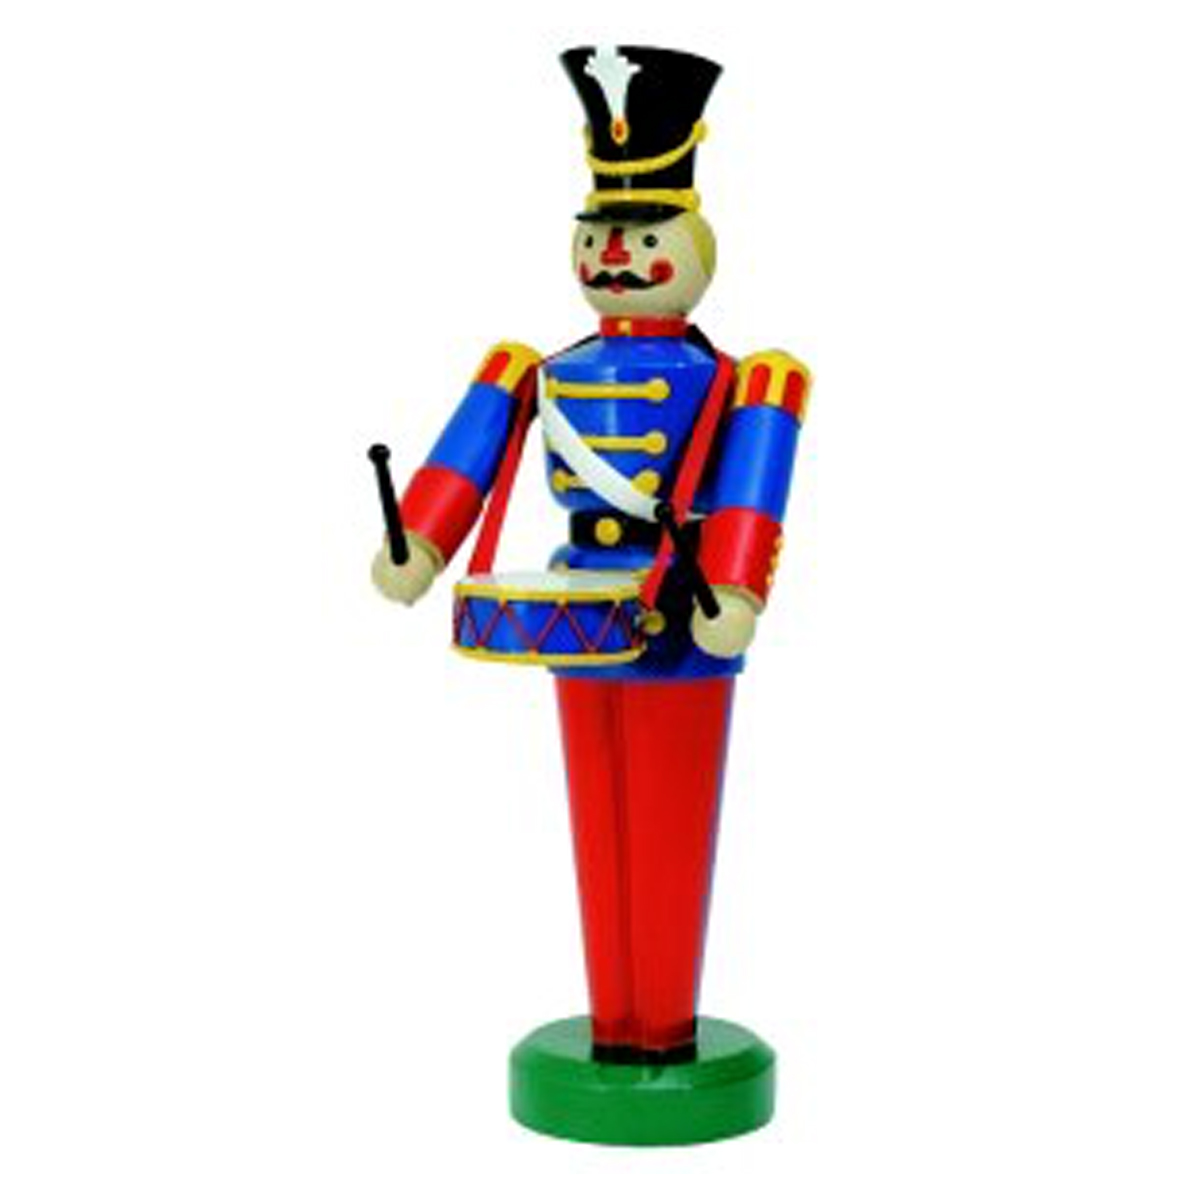 Blue and Red Toy Soldier with Blue Drum